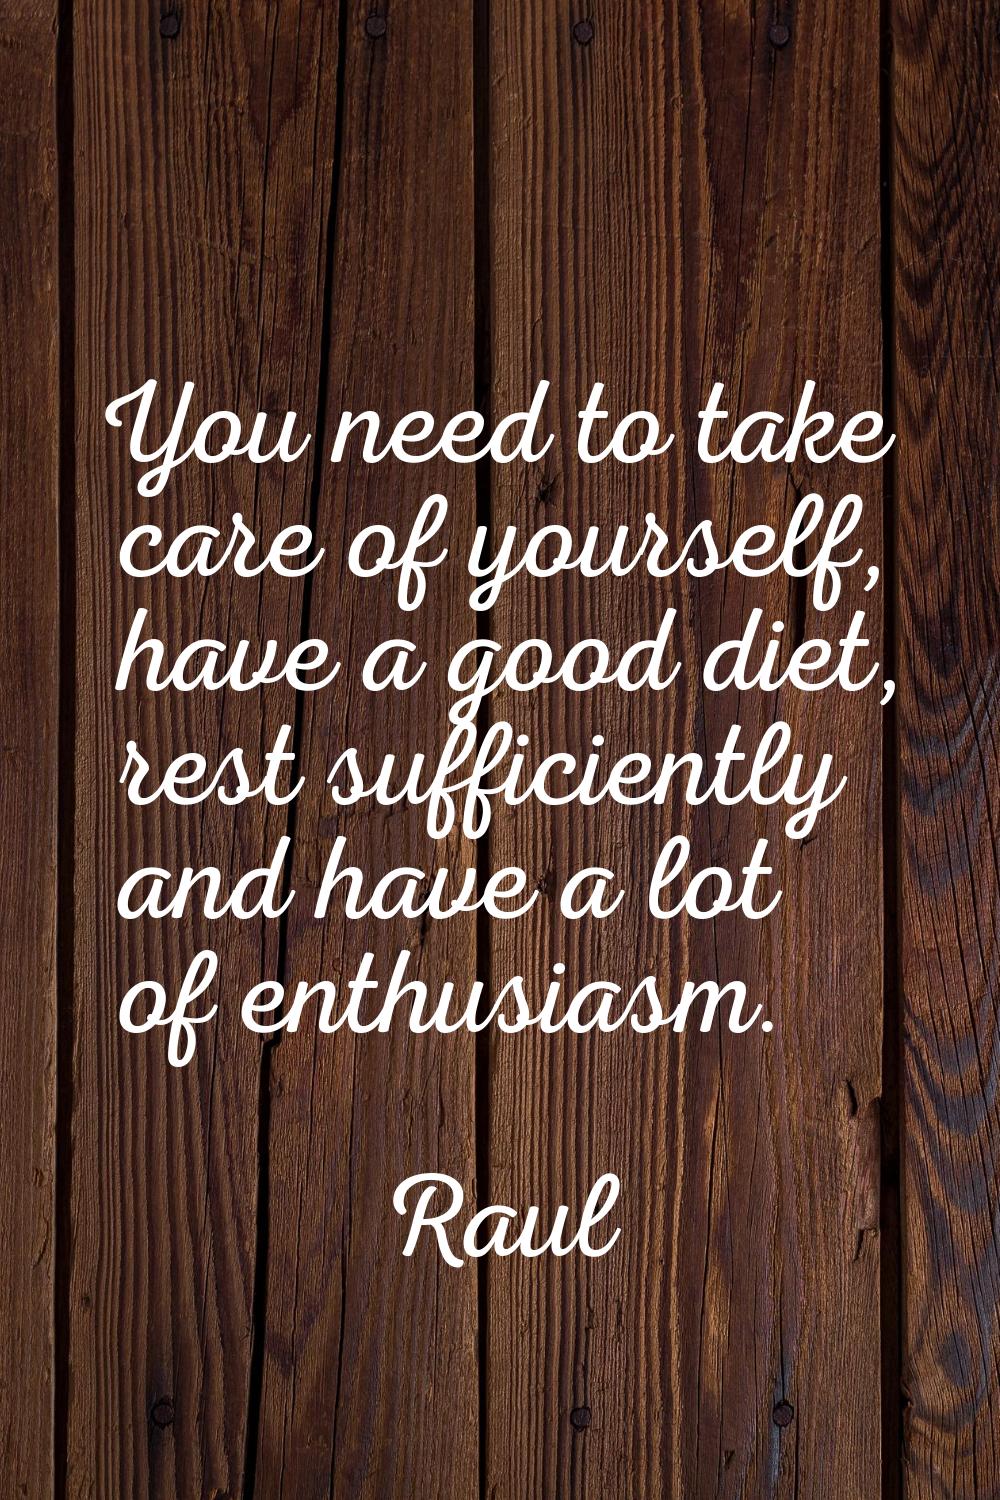 You need to take care of yourself, have a good diet, rest sufficiently and have a lot of enthusiasm